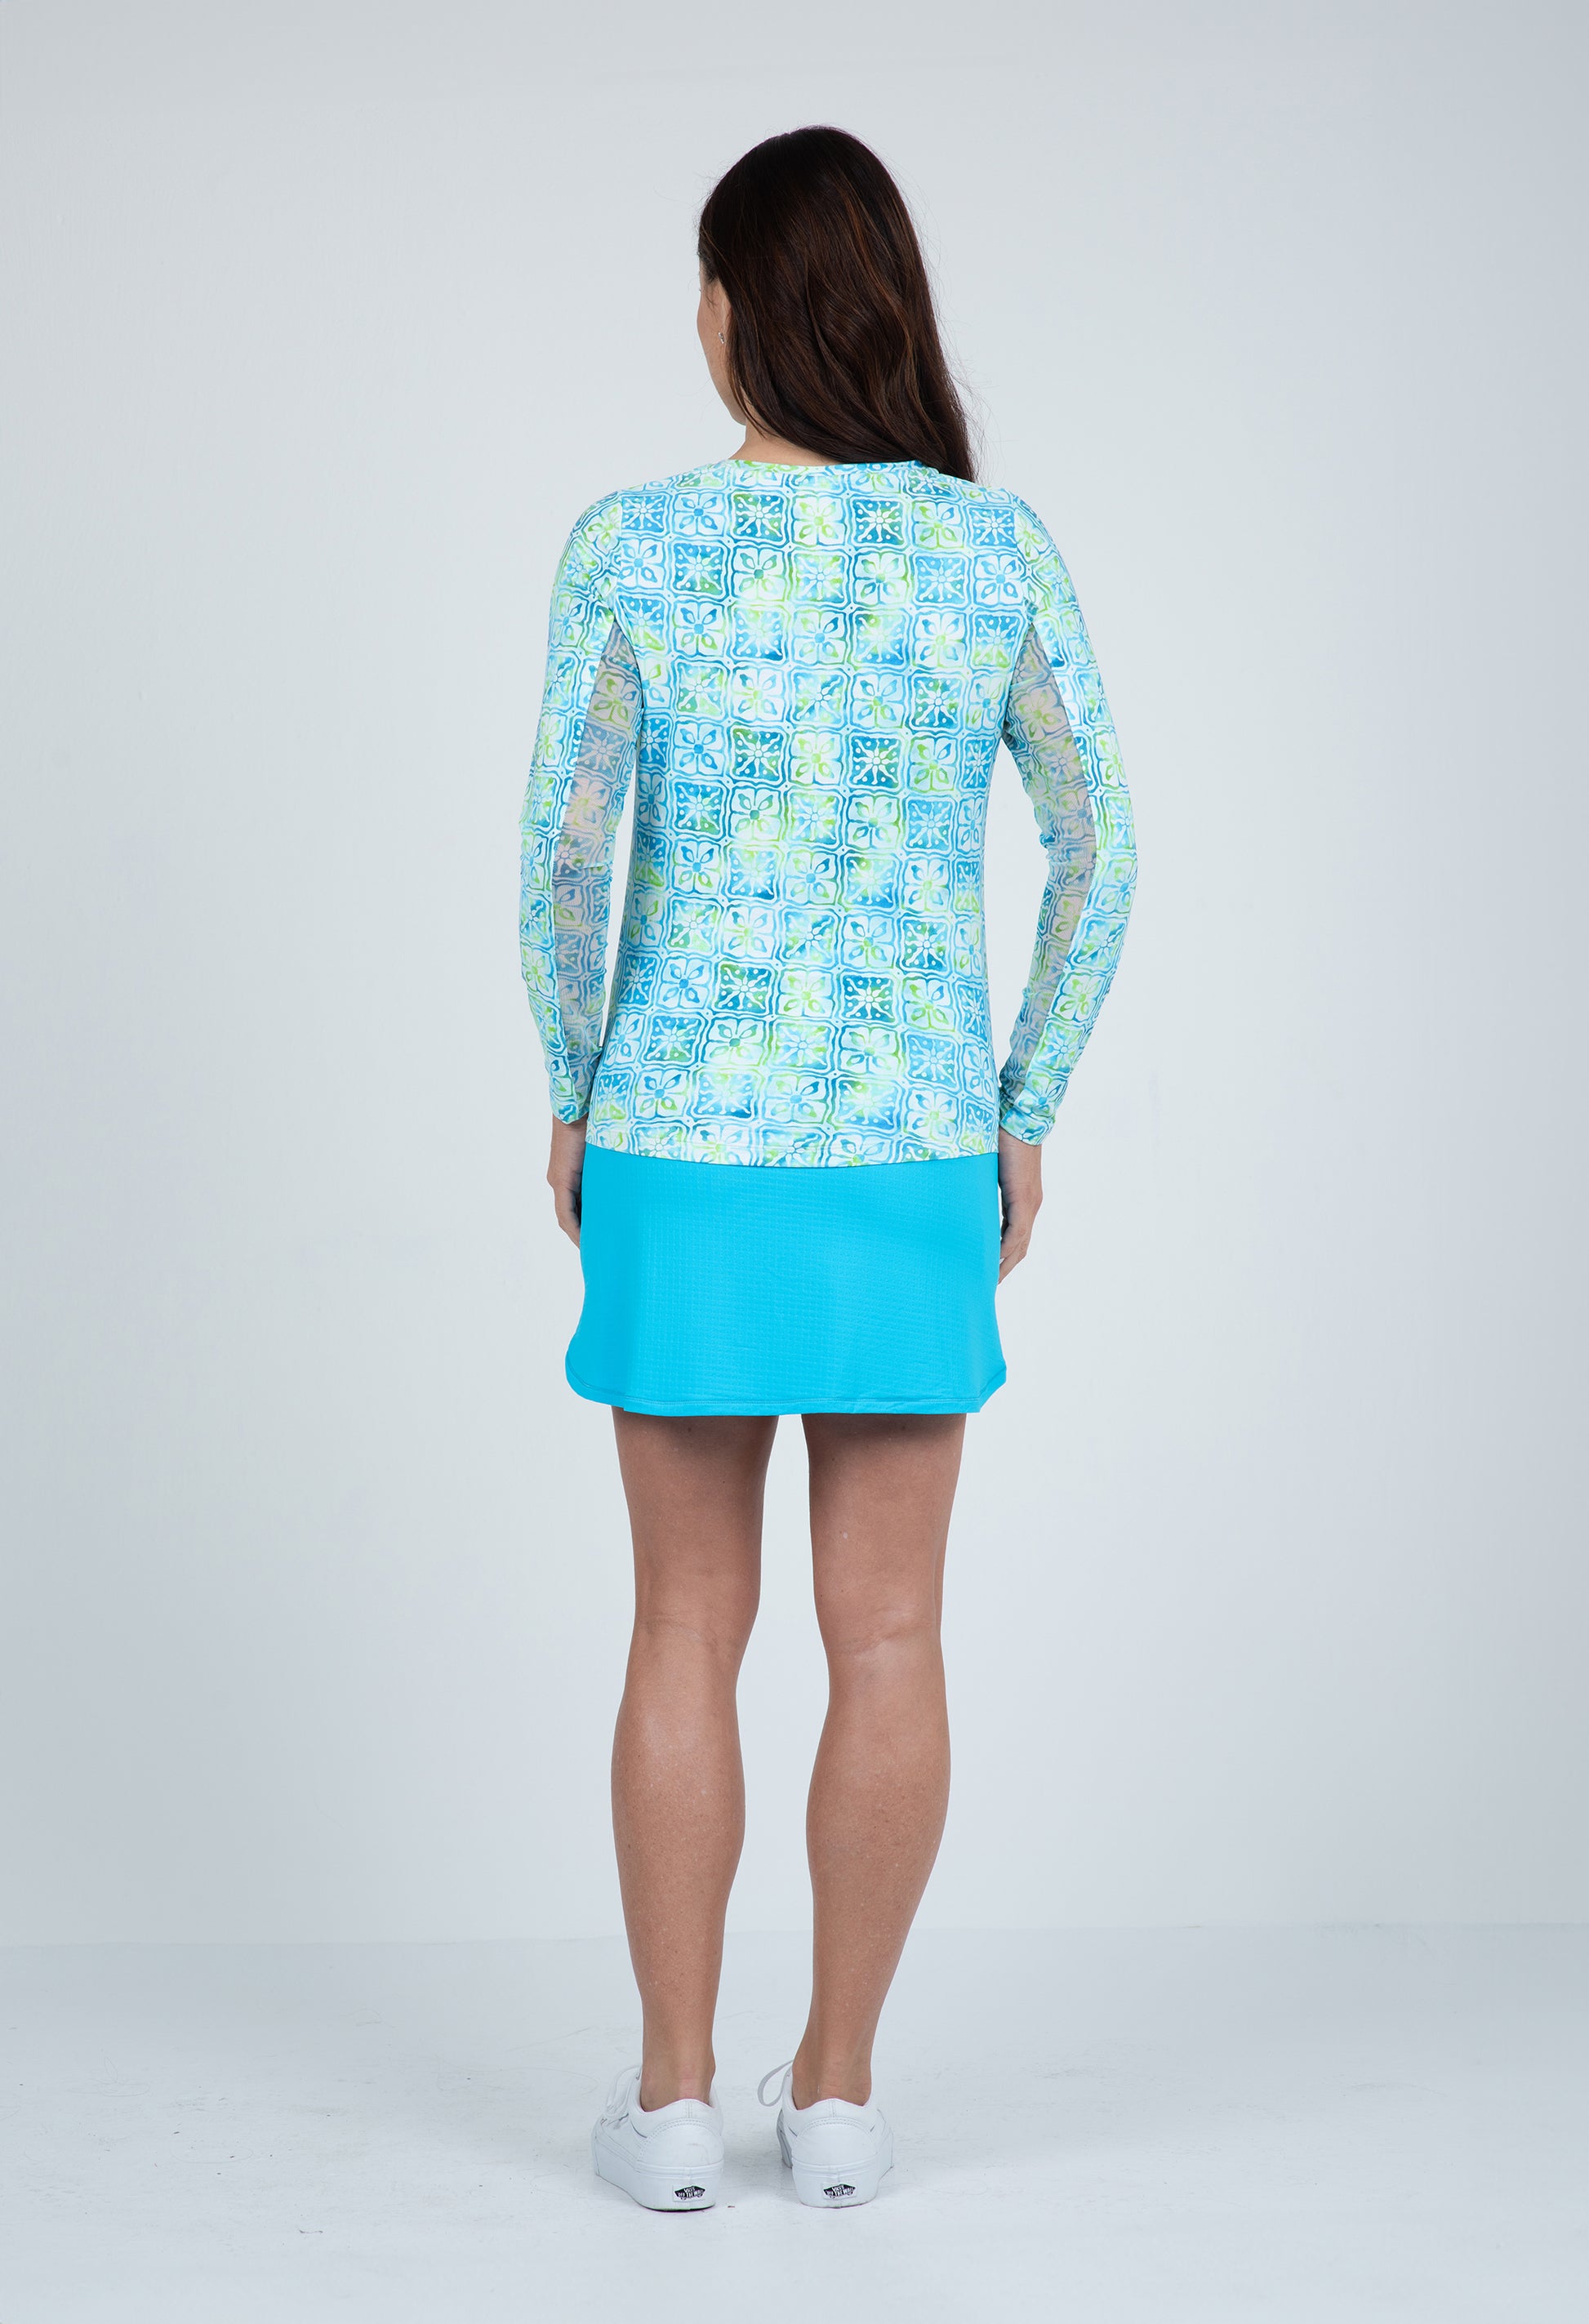 IBKÜL - Kathy Print Long Sleeve Crew Neck – 12871 - Color: Turquoise/Lime